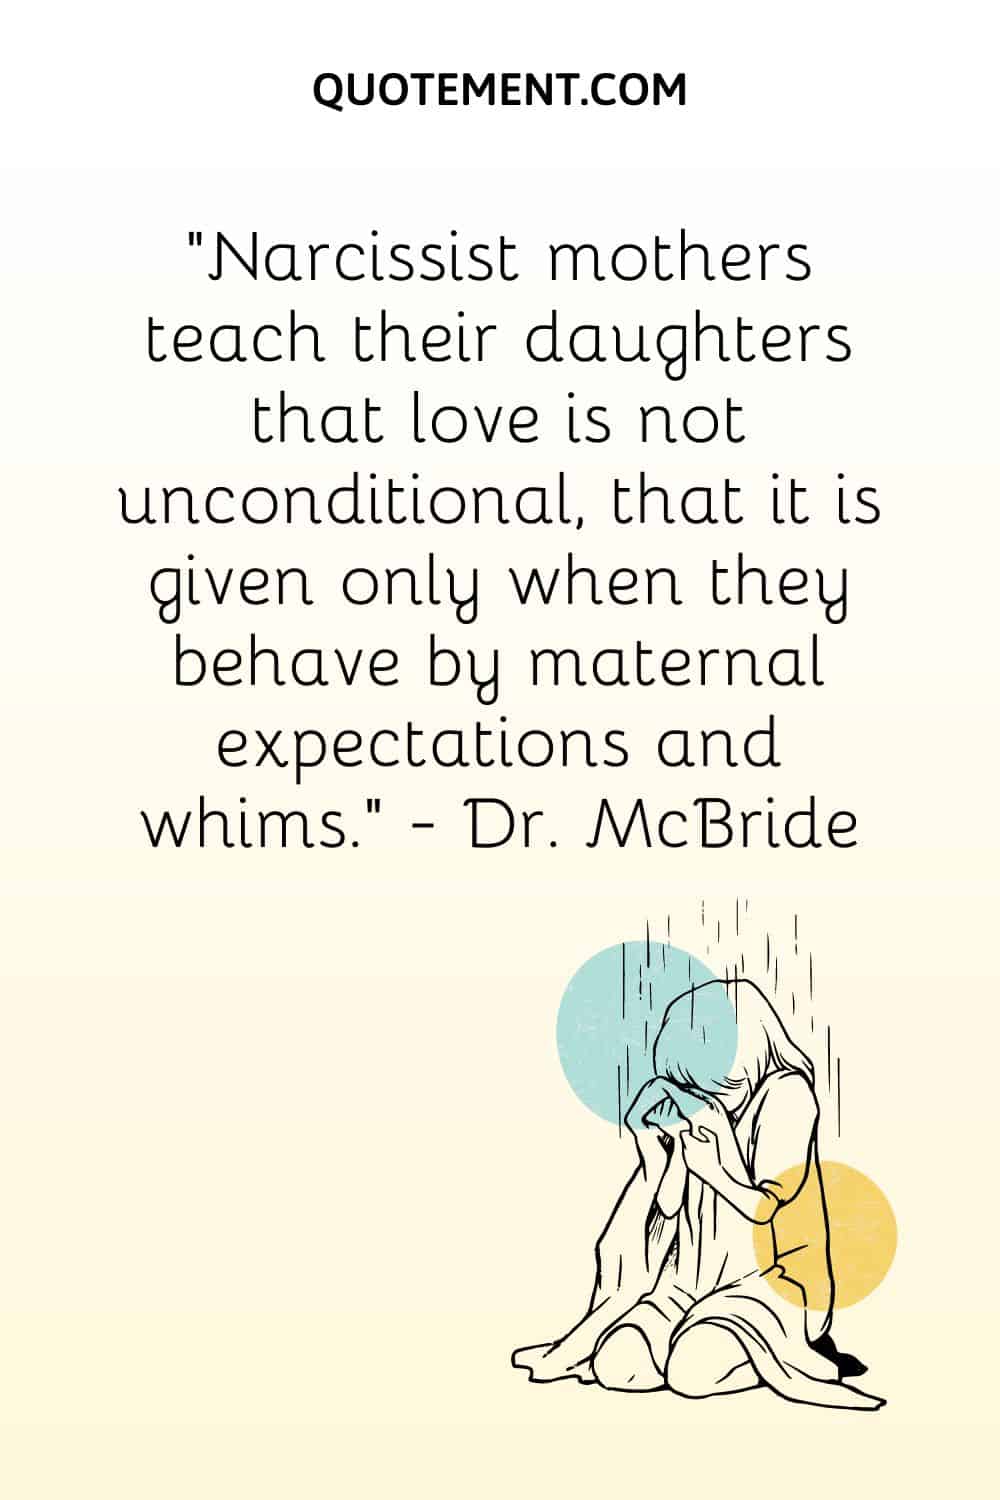 Narcissist mothers teach their daughters that love is not unconditional, that it is given only when they behave by maternal expectations and whims